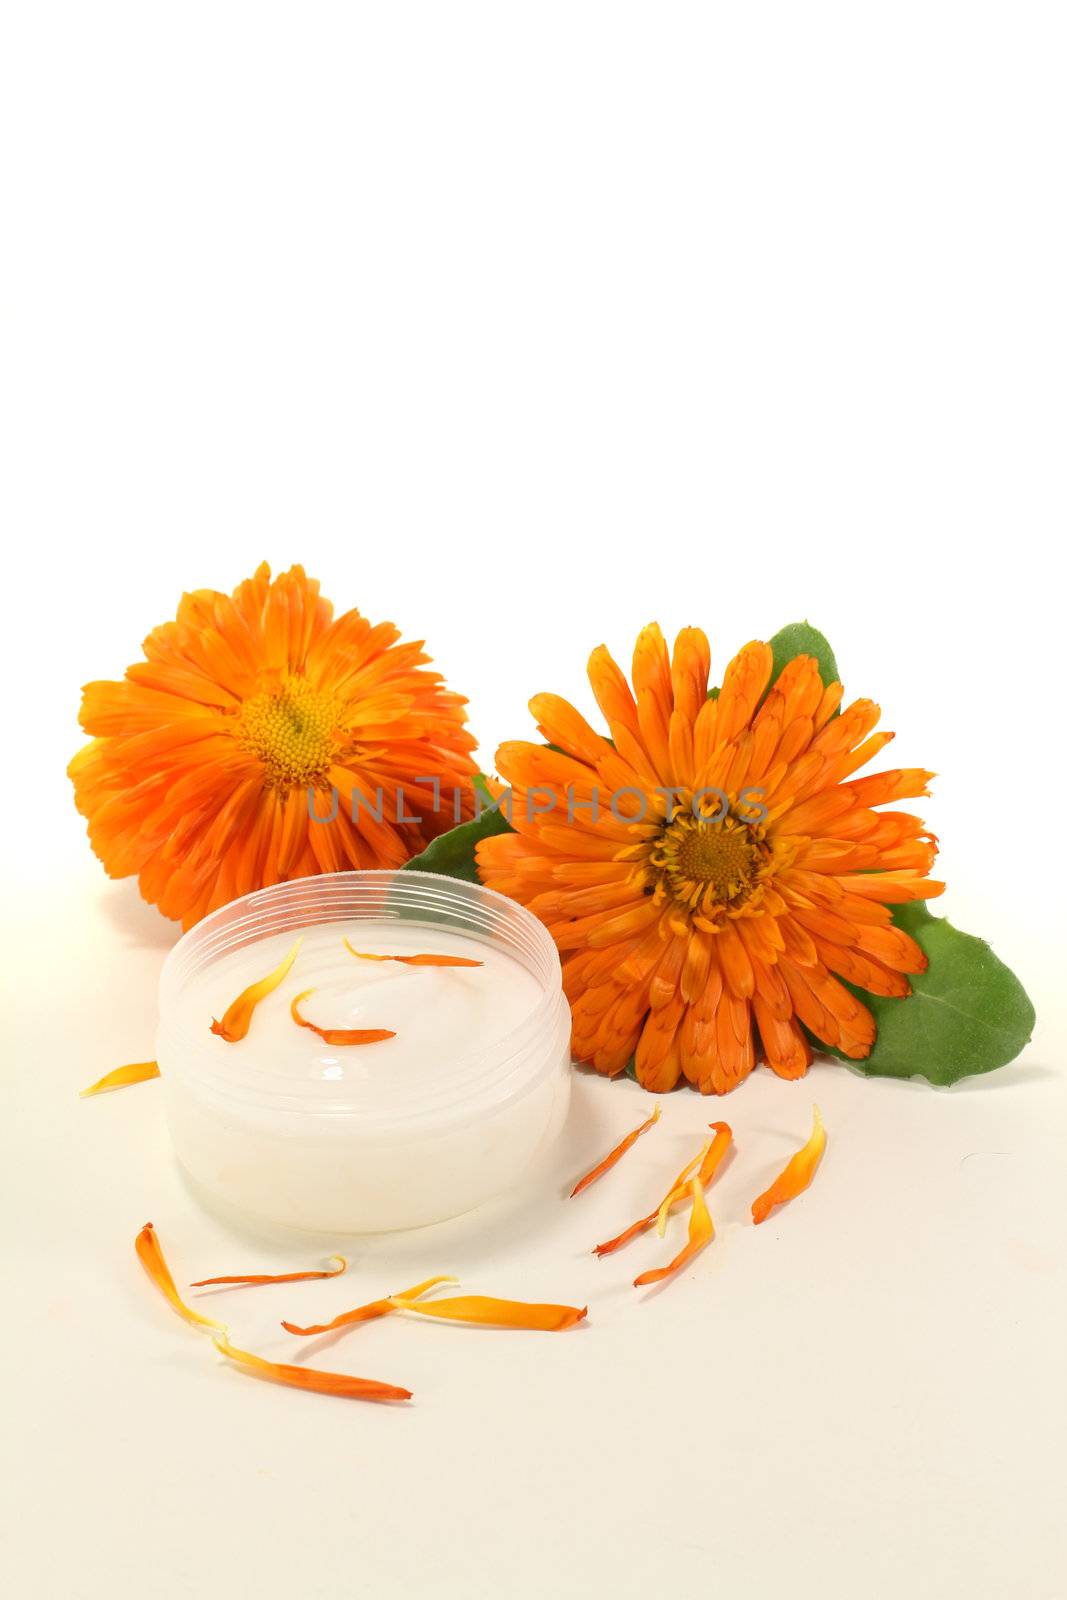 Calendula ointment with petals by discovery